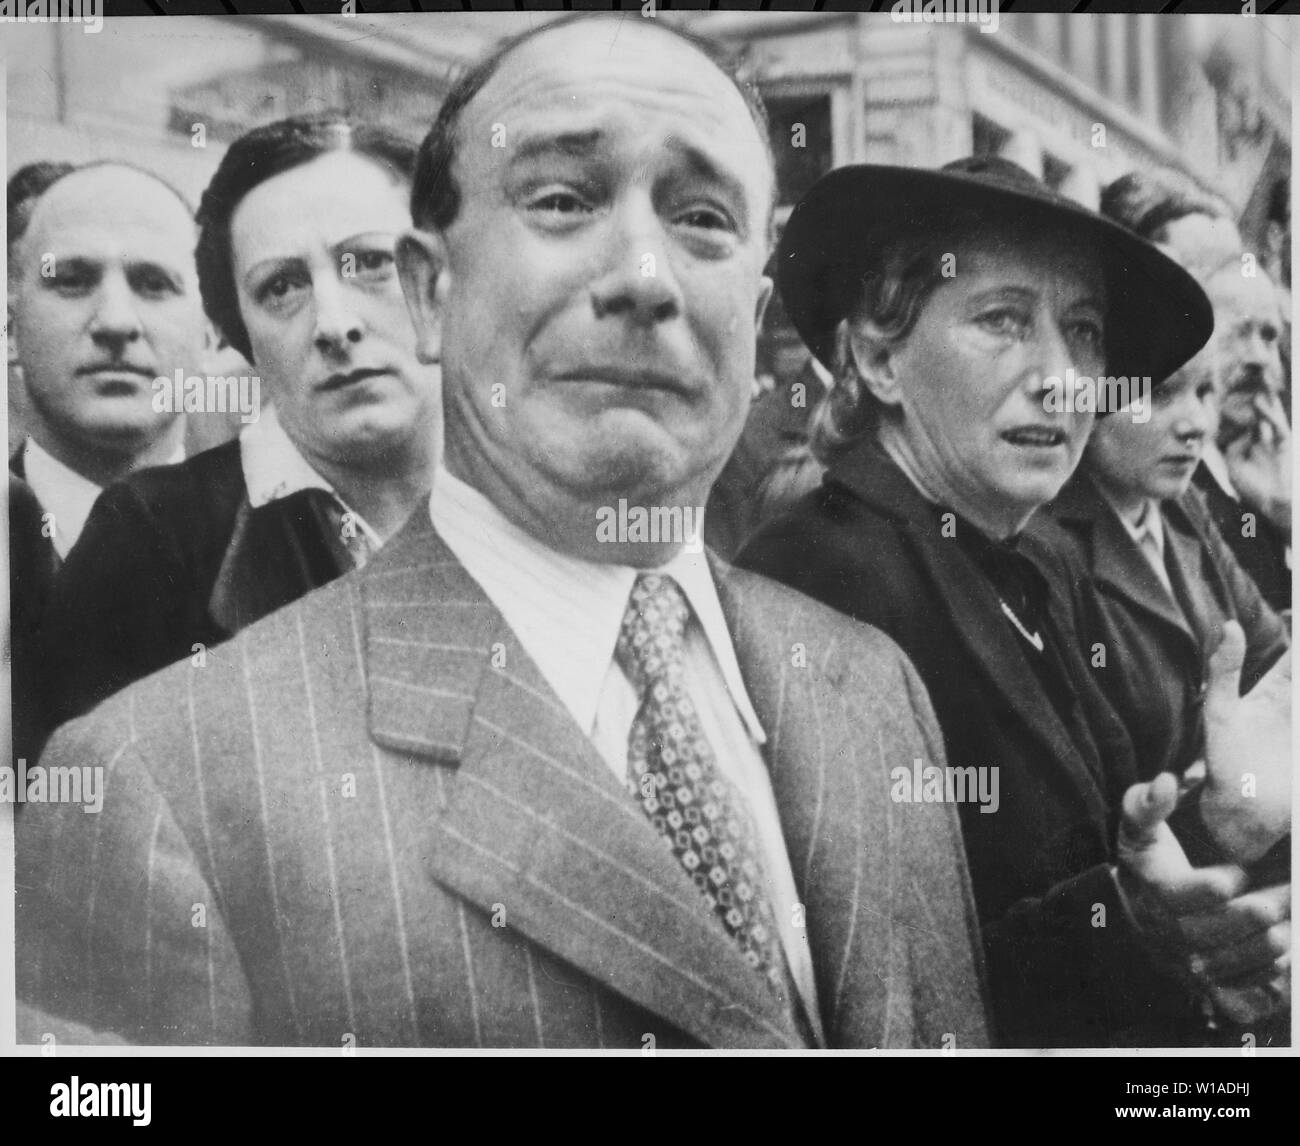 A Frenchman weeps as German soldiers march into the French capital, Paris, on June 14, 1940, after the Allied armies had been driven back across France.; A Frenchmen weeps as historic flags of French regiments are paraded down the streets of Marseille in February 1941, to be loaded on ships and sent to Algeria for safekeeping.  They had been removed from Paris prior to the Germans arriving, and had been given to forces under General Maxime Weygand.  After the war, the pictured man was identified as M. Jerôme Barzetti.[1] The image is taken from a film clip, a portion of which was later used in Stock Photo